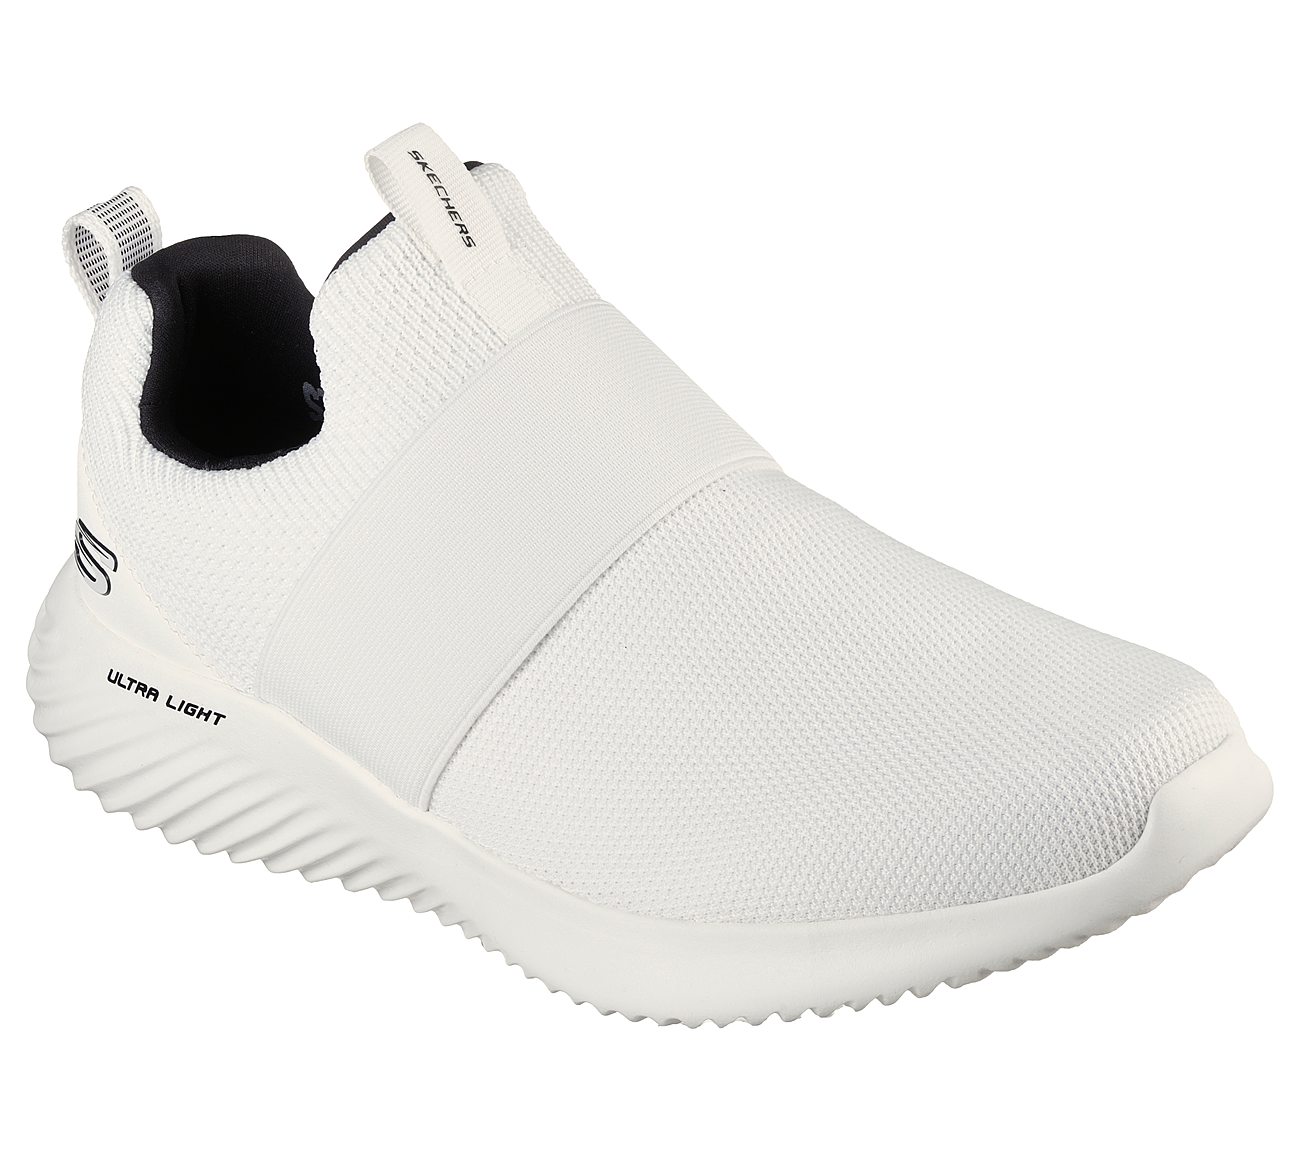 BOUNDER - INSHORE, WHITE BLACK Footwear Right View